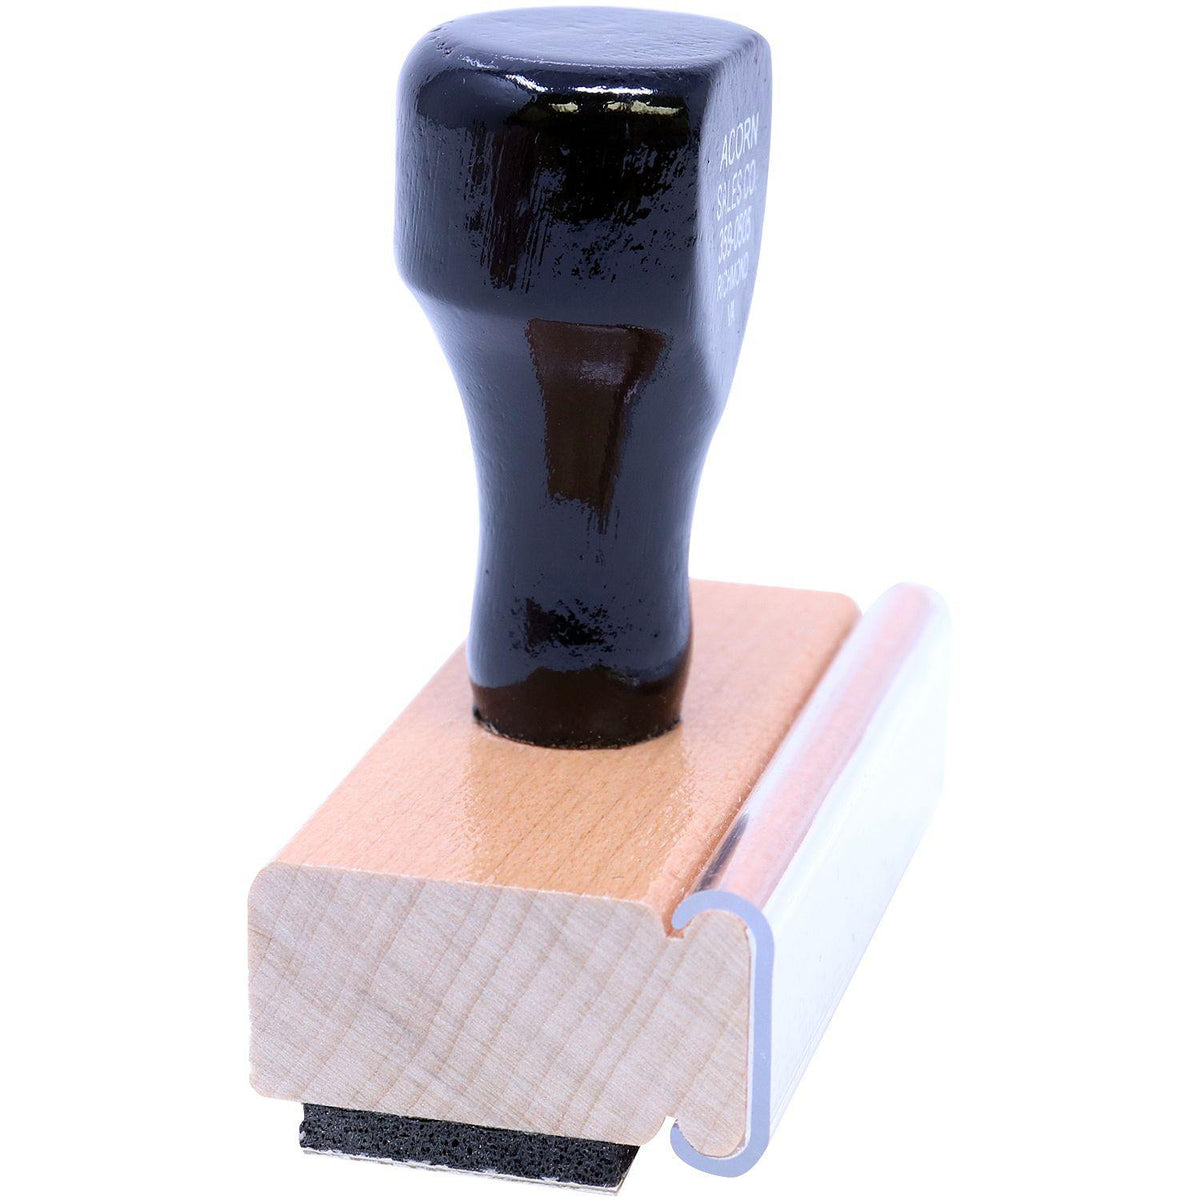 Side View of Large Bold X-Rays Rubber Stamp at an Angle